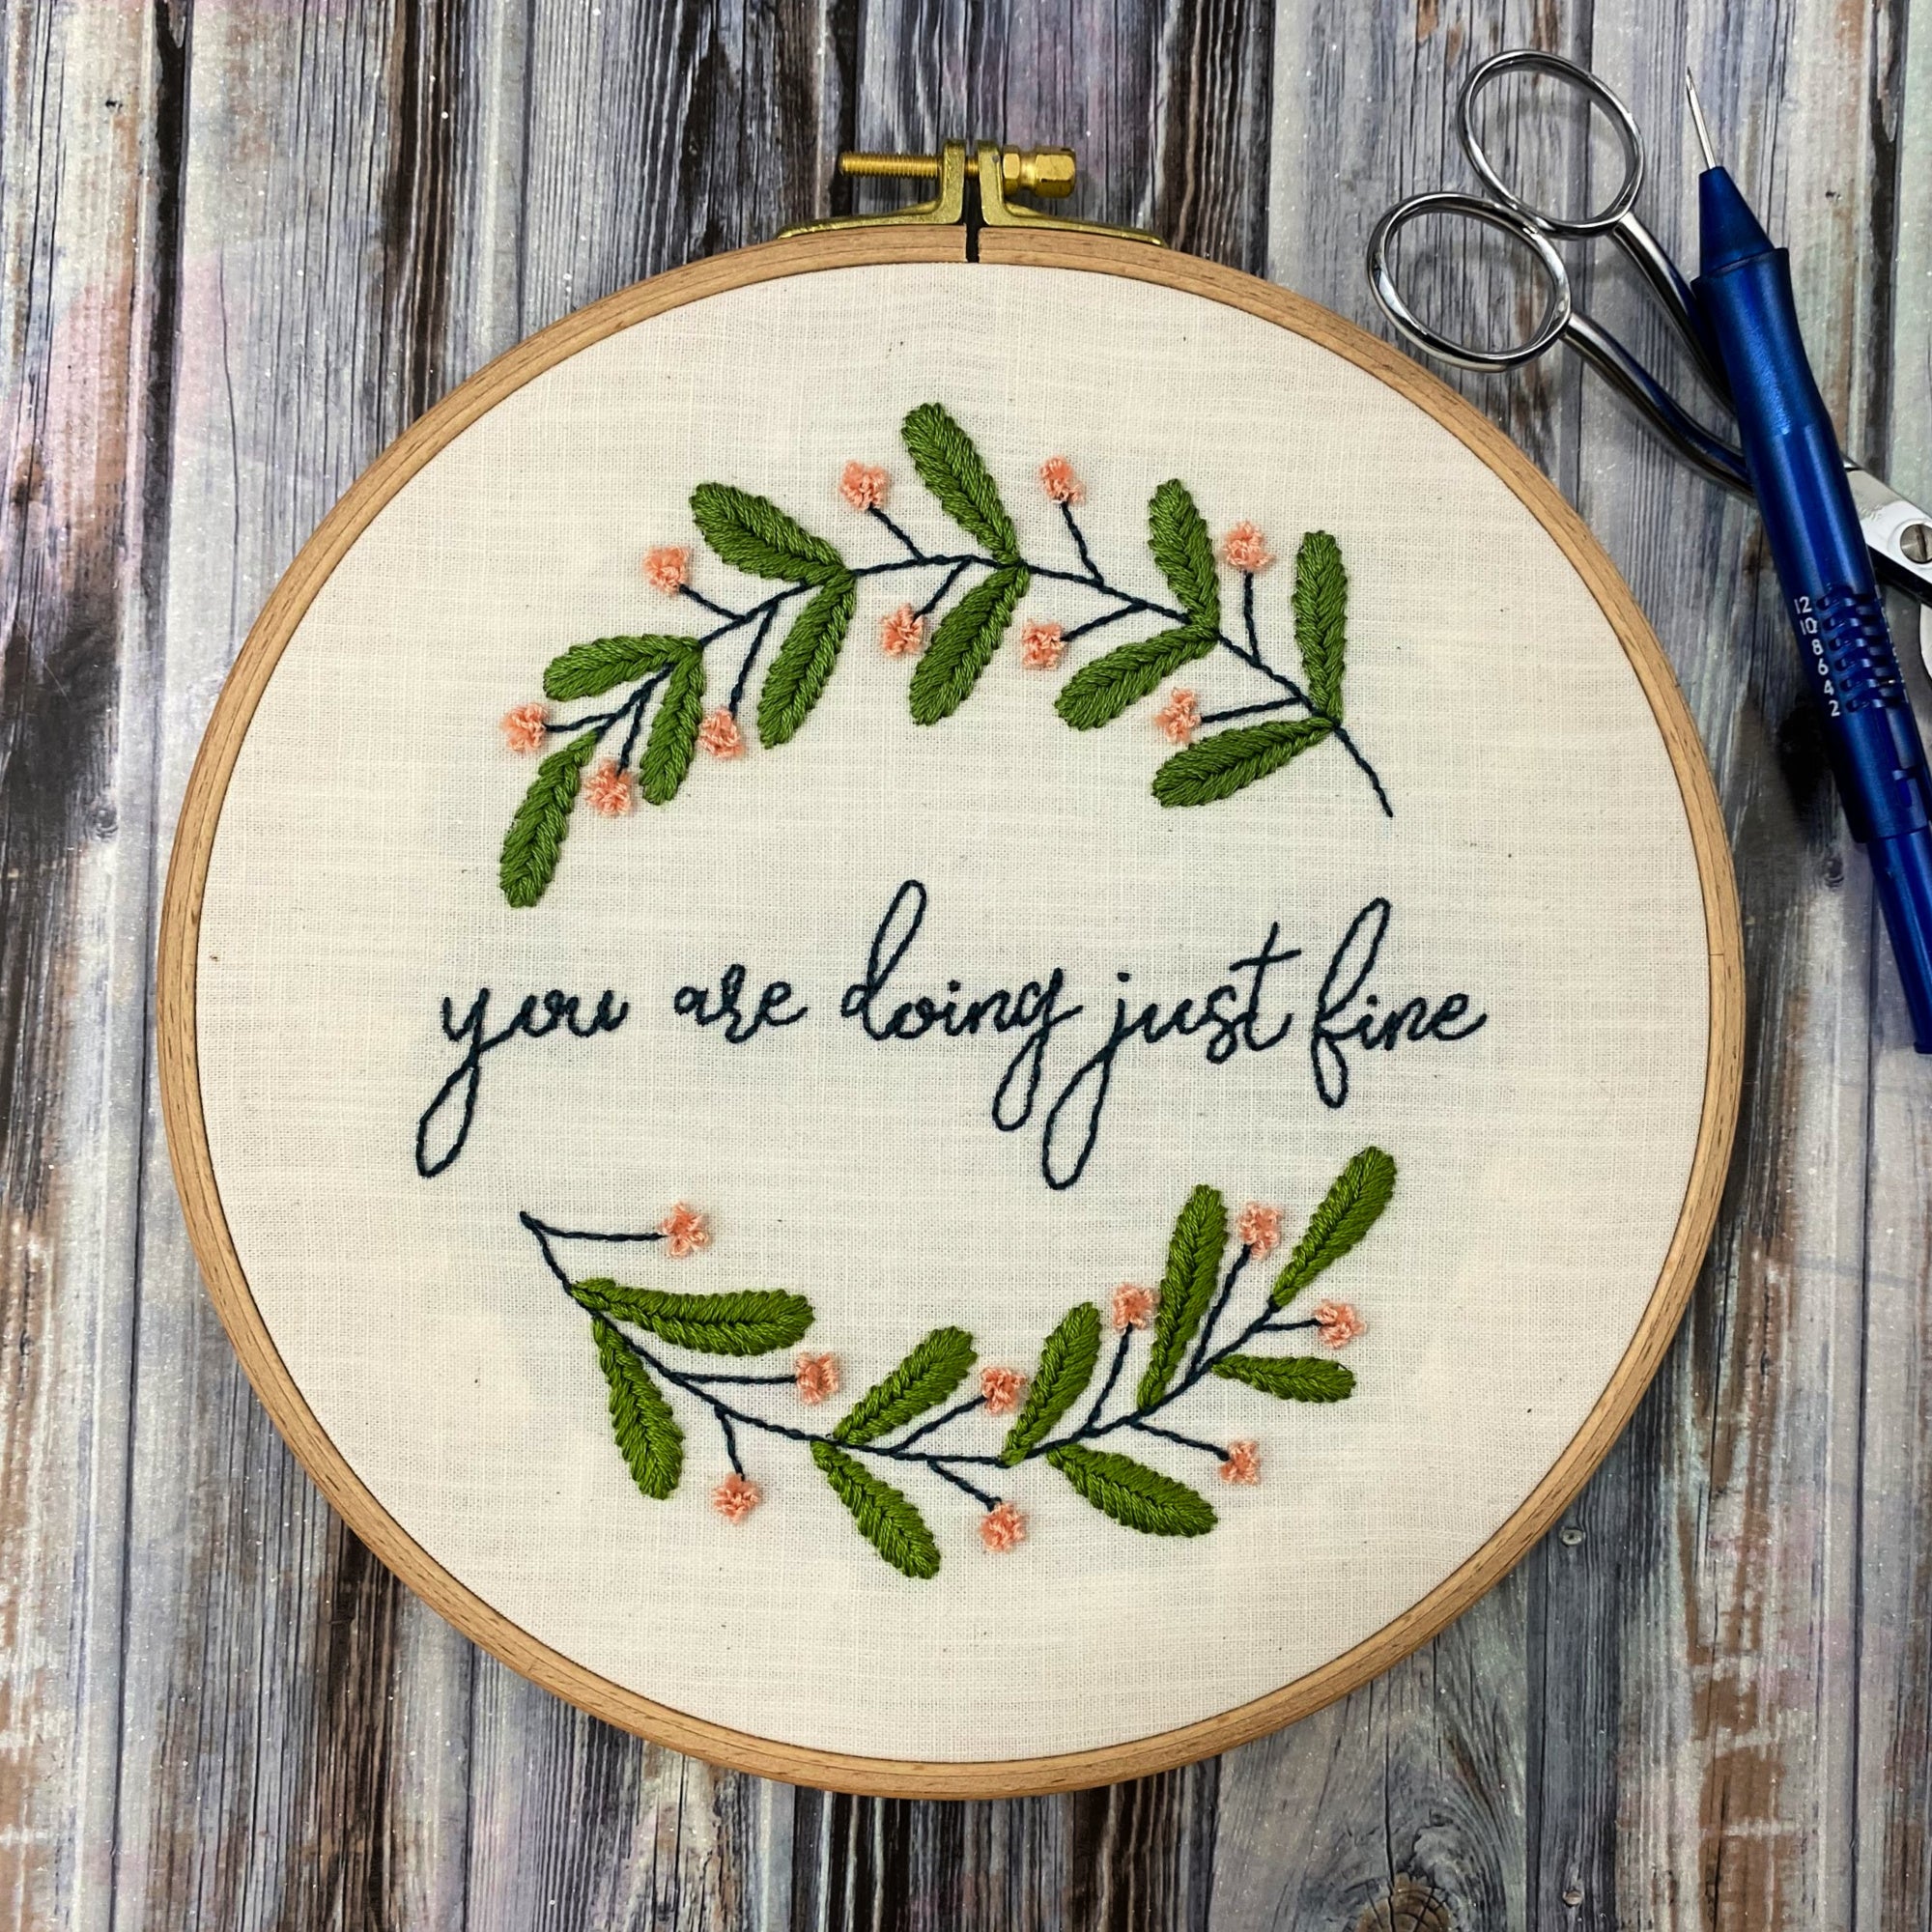 embroidery hoop with you are doing just fine wall art and an Ultra Punch needle sitting on a table